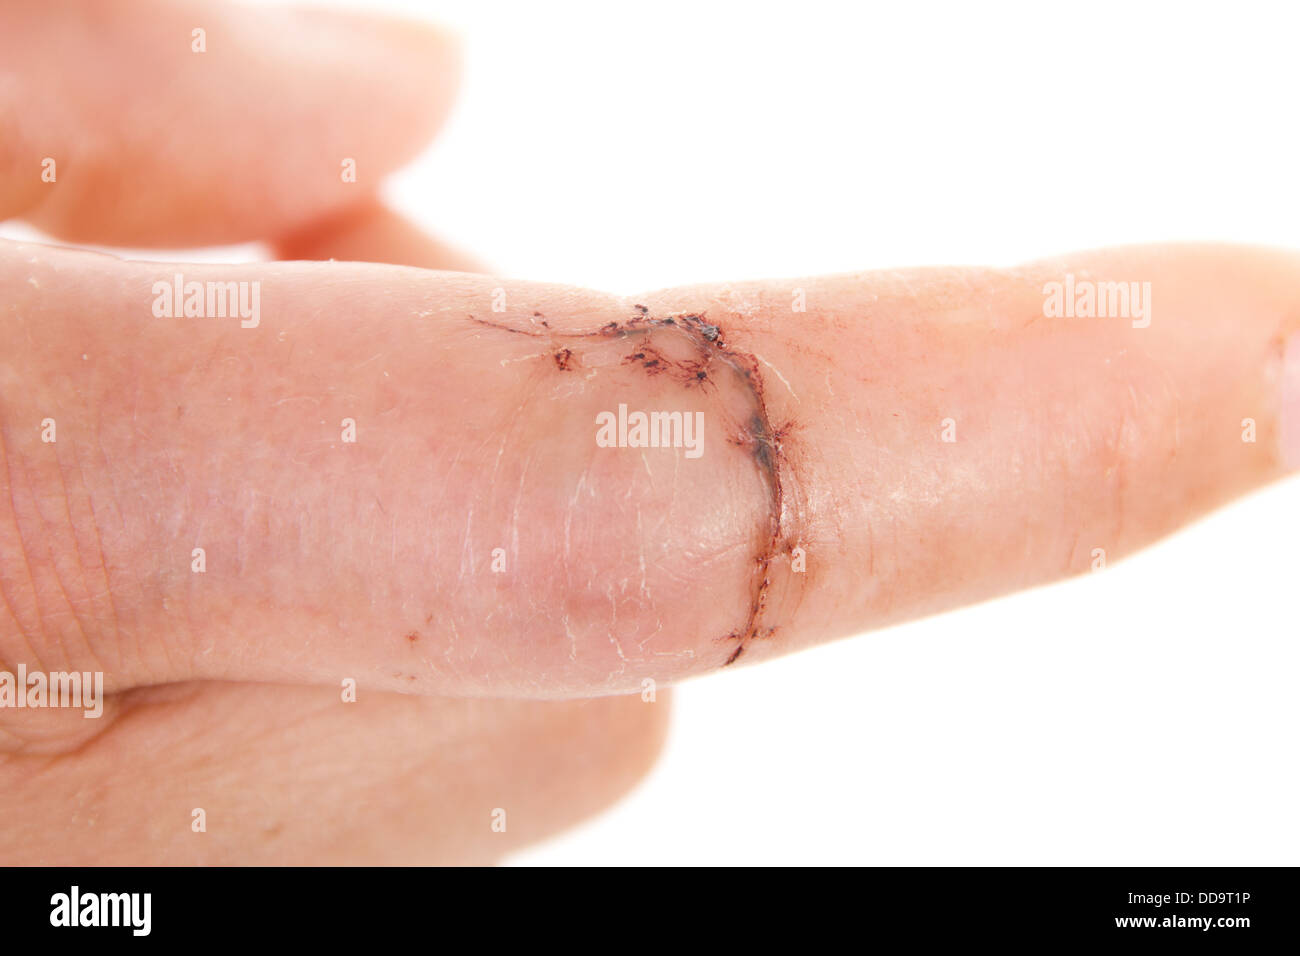 Close-up of sewed wound on caucasian finger Stock Photo